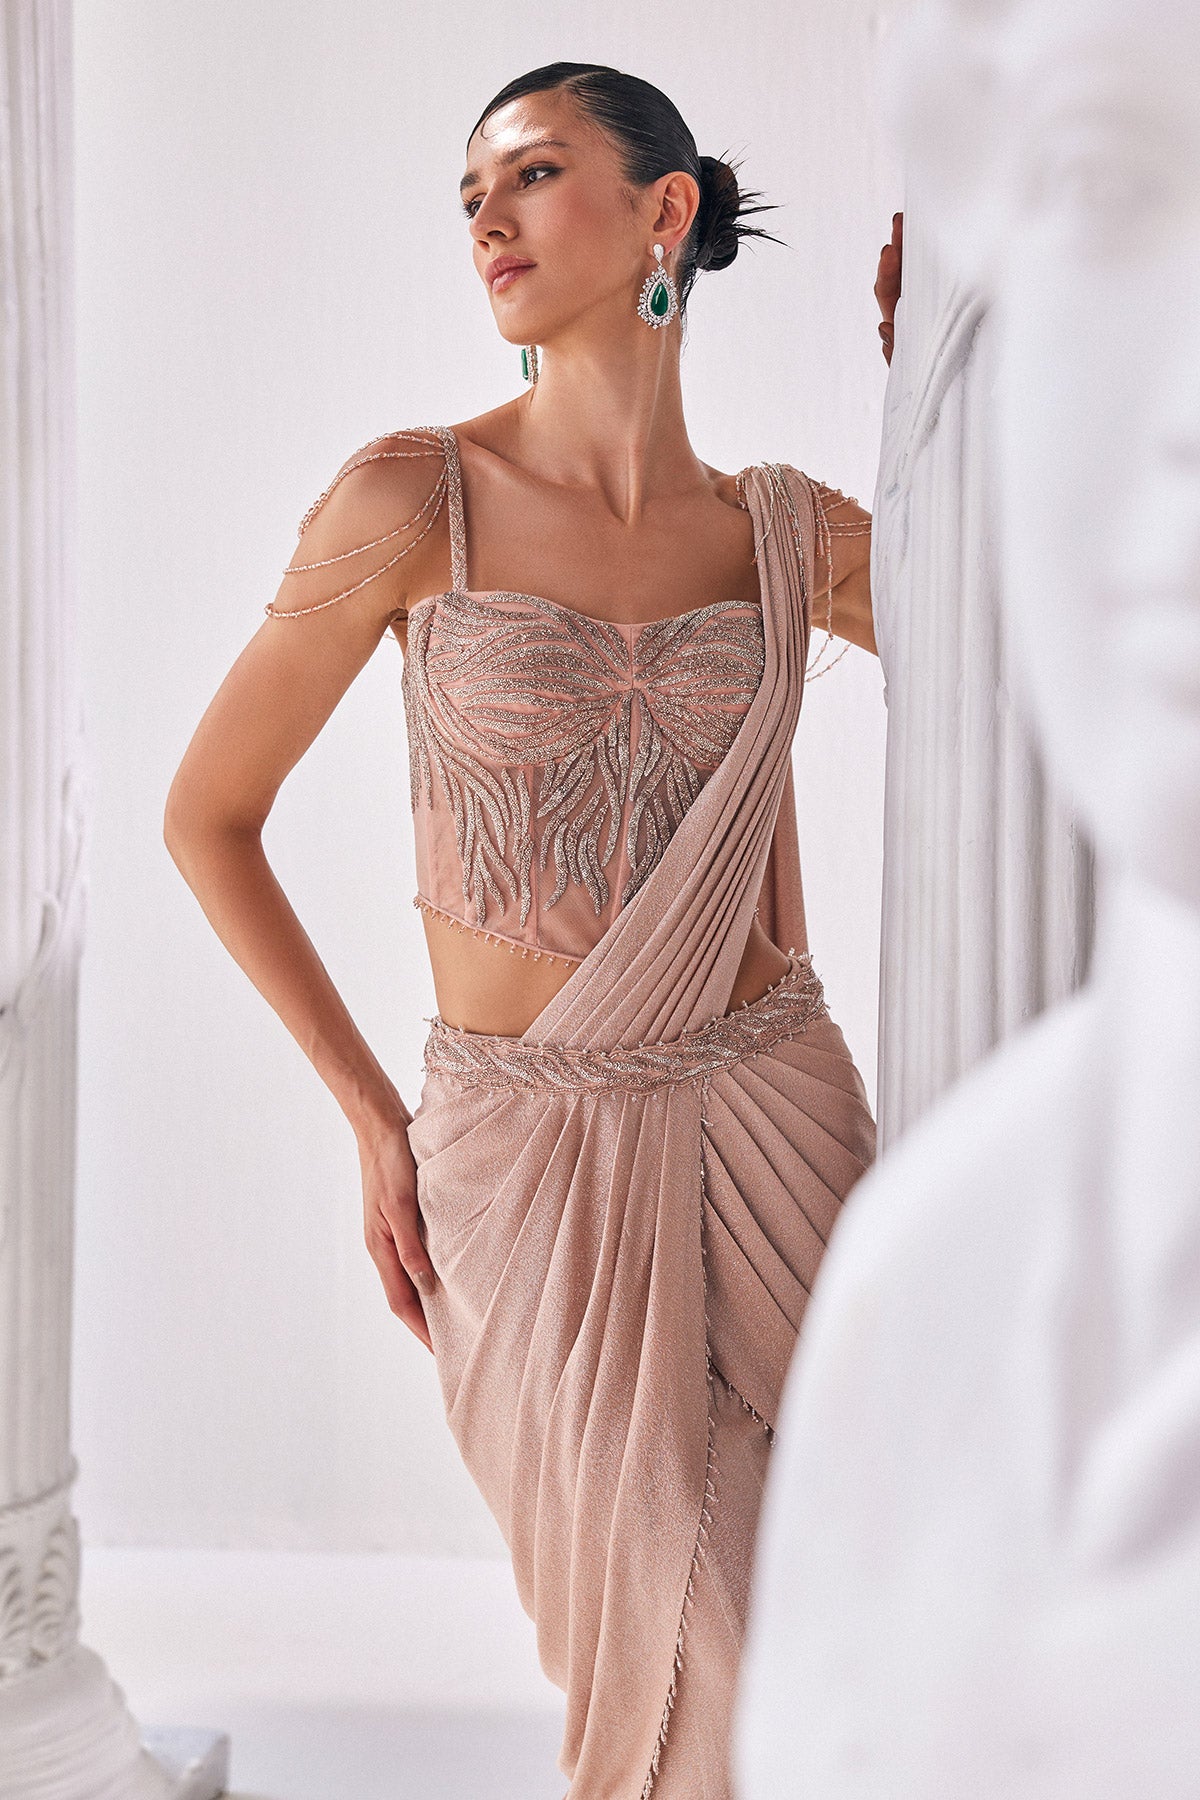 Peach Draped Saree In Luxurious Shimmer Lyrcra. It Is Paired With Anembroidered Corset Blouse And Highlighted With A Statement Belt.